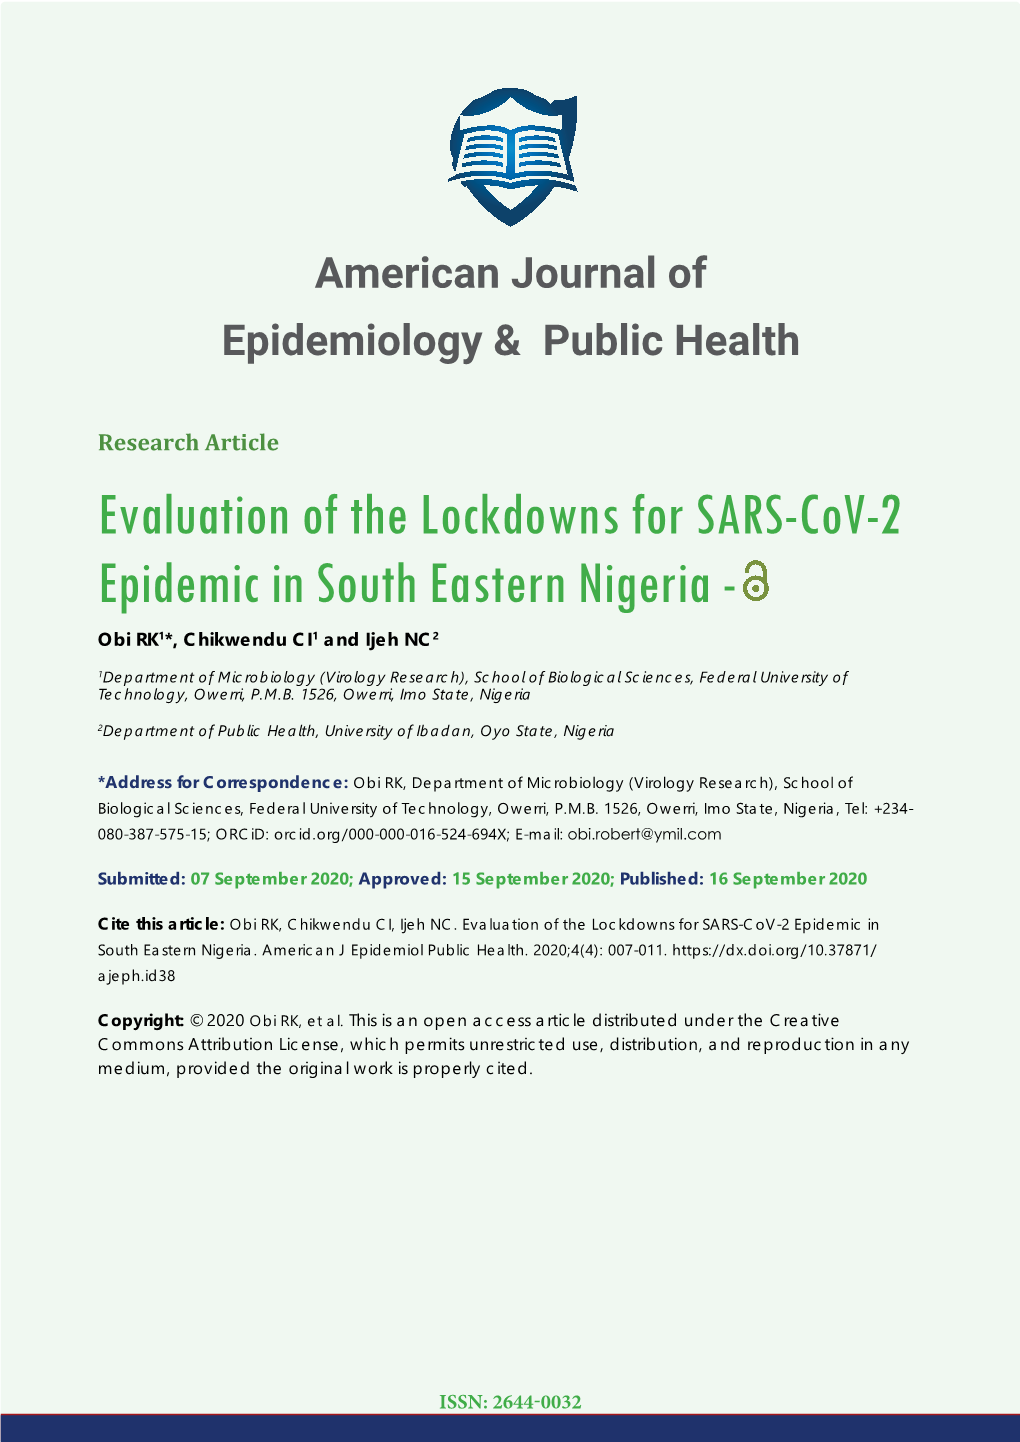 Evaluation of the Lockdowns for SARS-Cov-2 Epidemic in South Eastern Nigeria - Obi RK1*, Chikwendu CI1 and Ijeh NC2